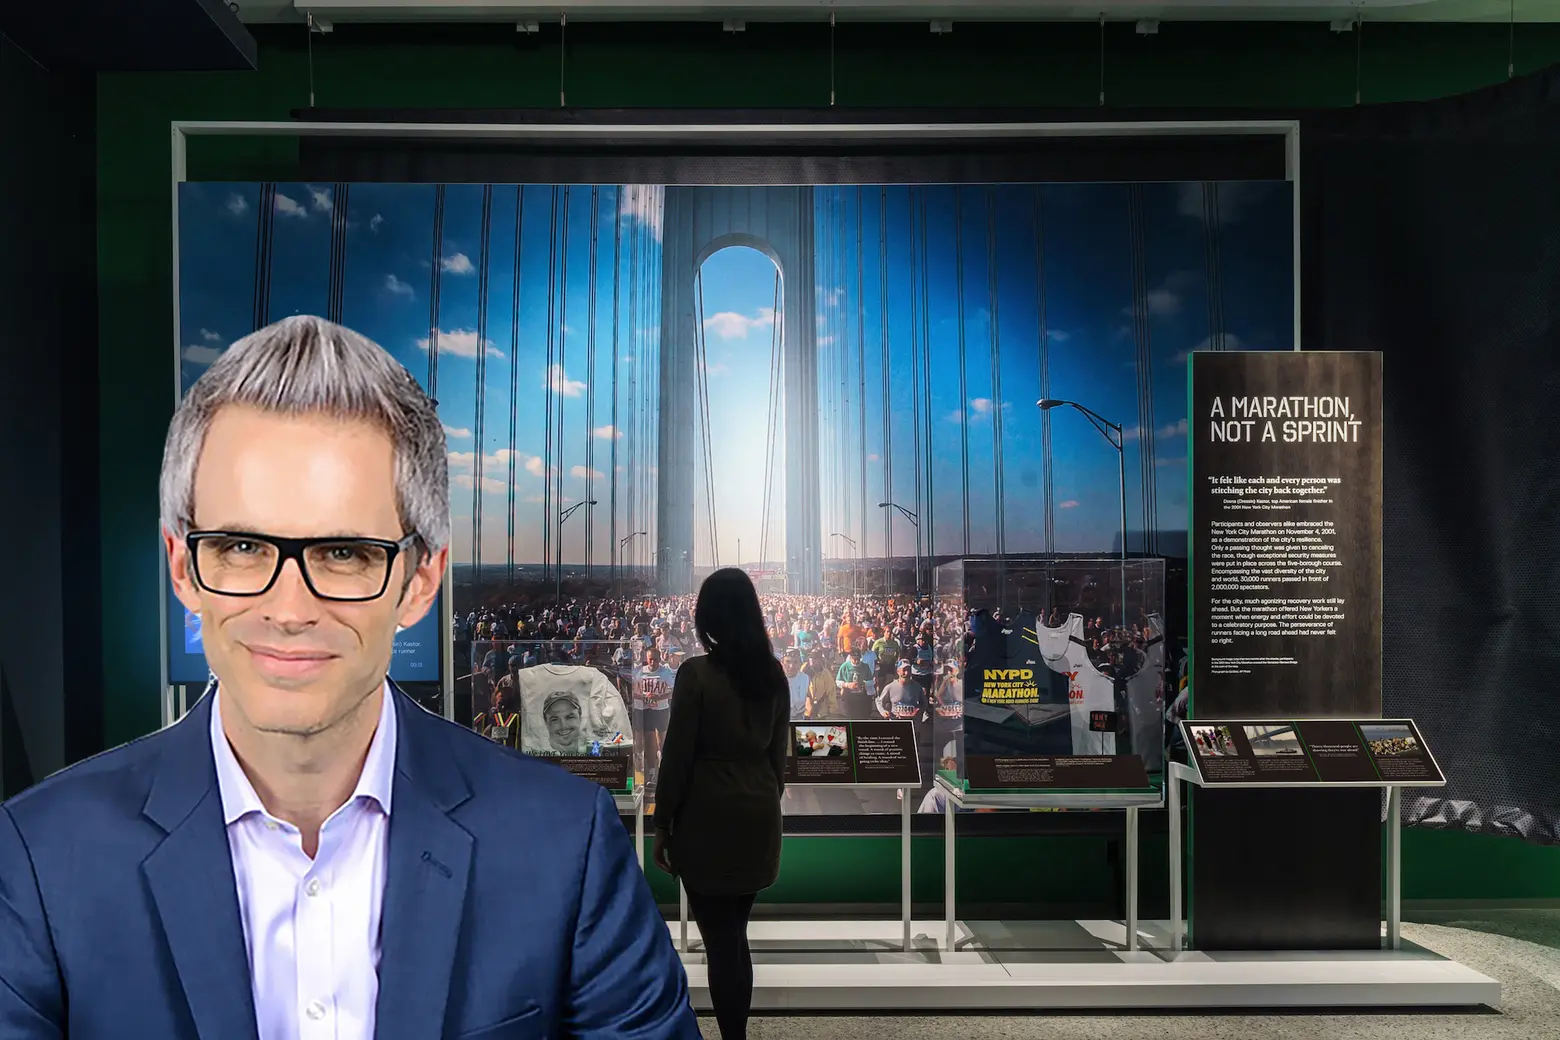 INTERVIEW: Exhibition designer Jonathan Alger on how sports healed NYC and the nation after 9/11